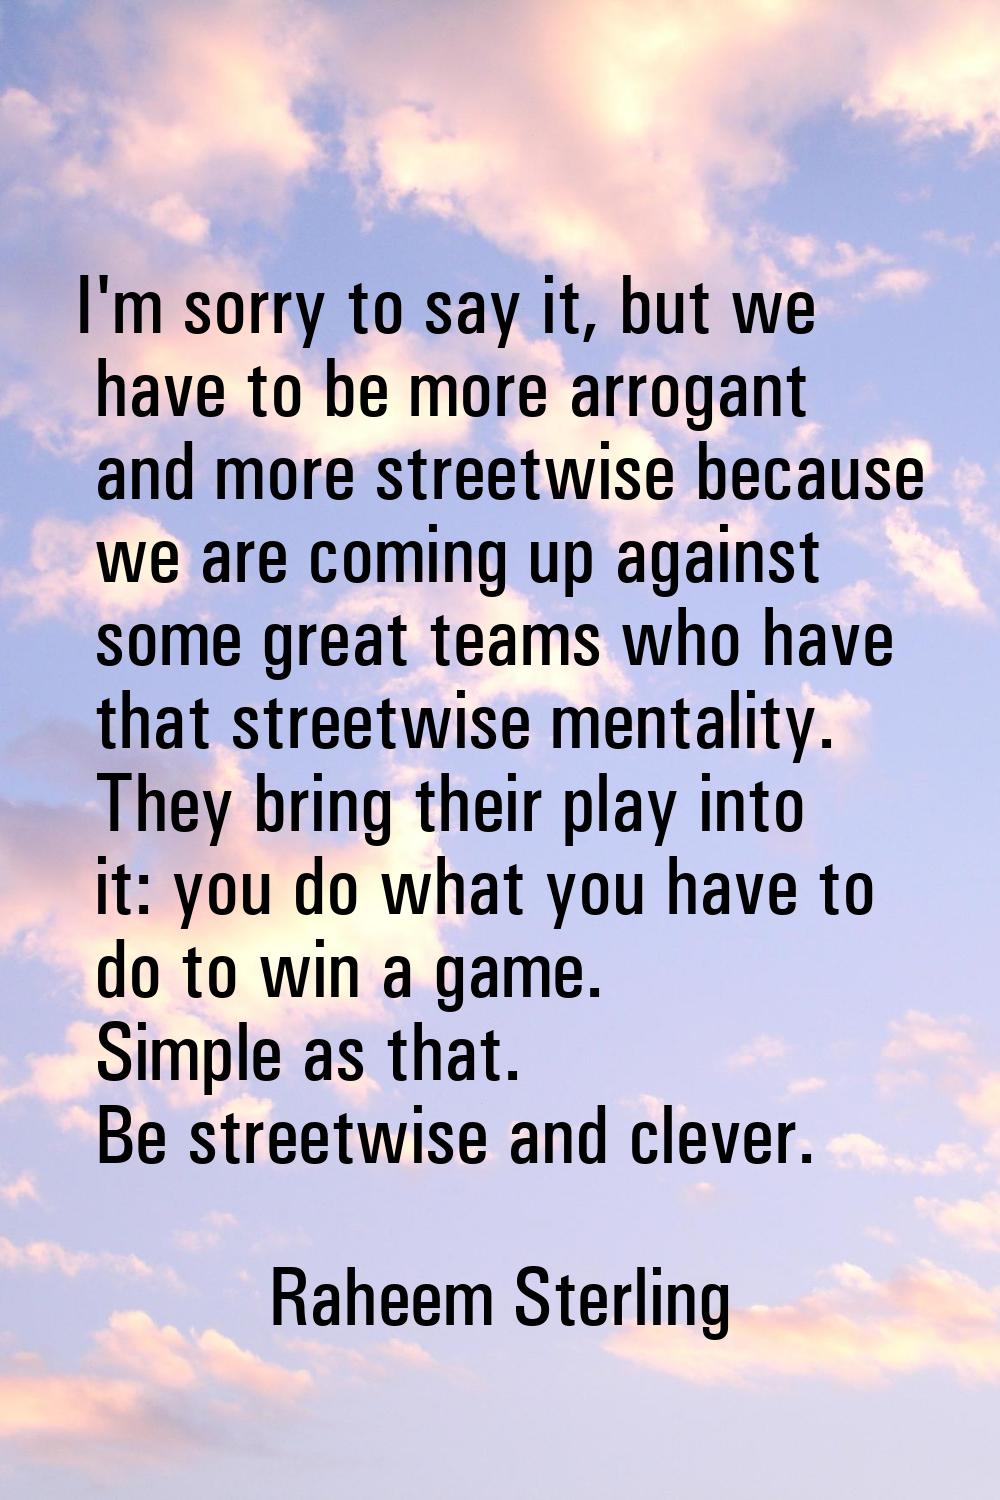 I'm sorry to say it, but we have to be more arrogant and more streetwise because we are coming up a